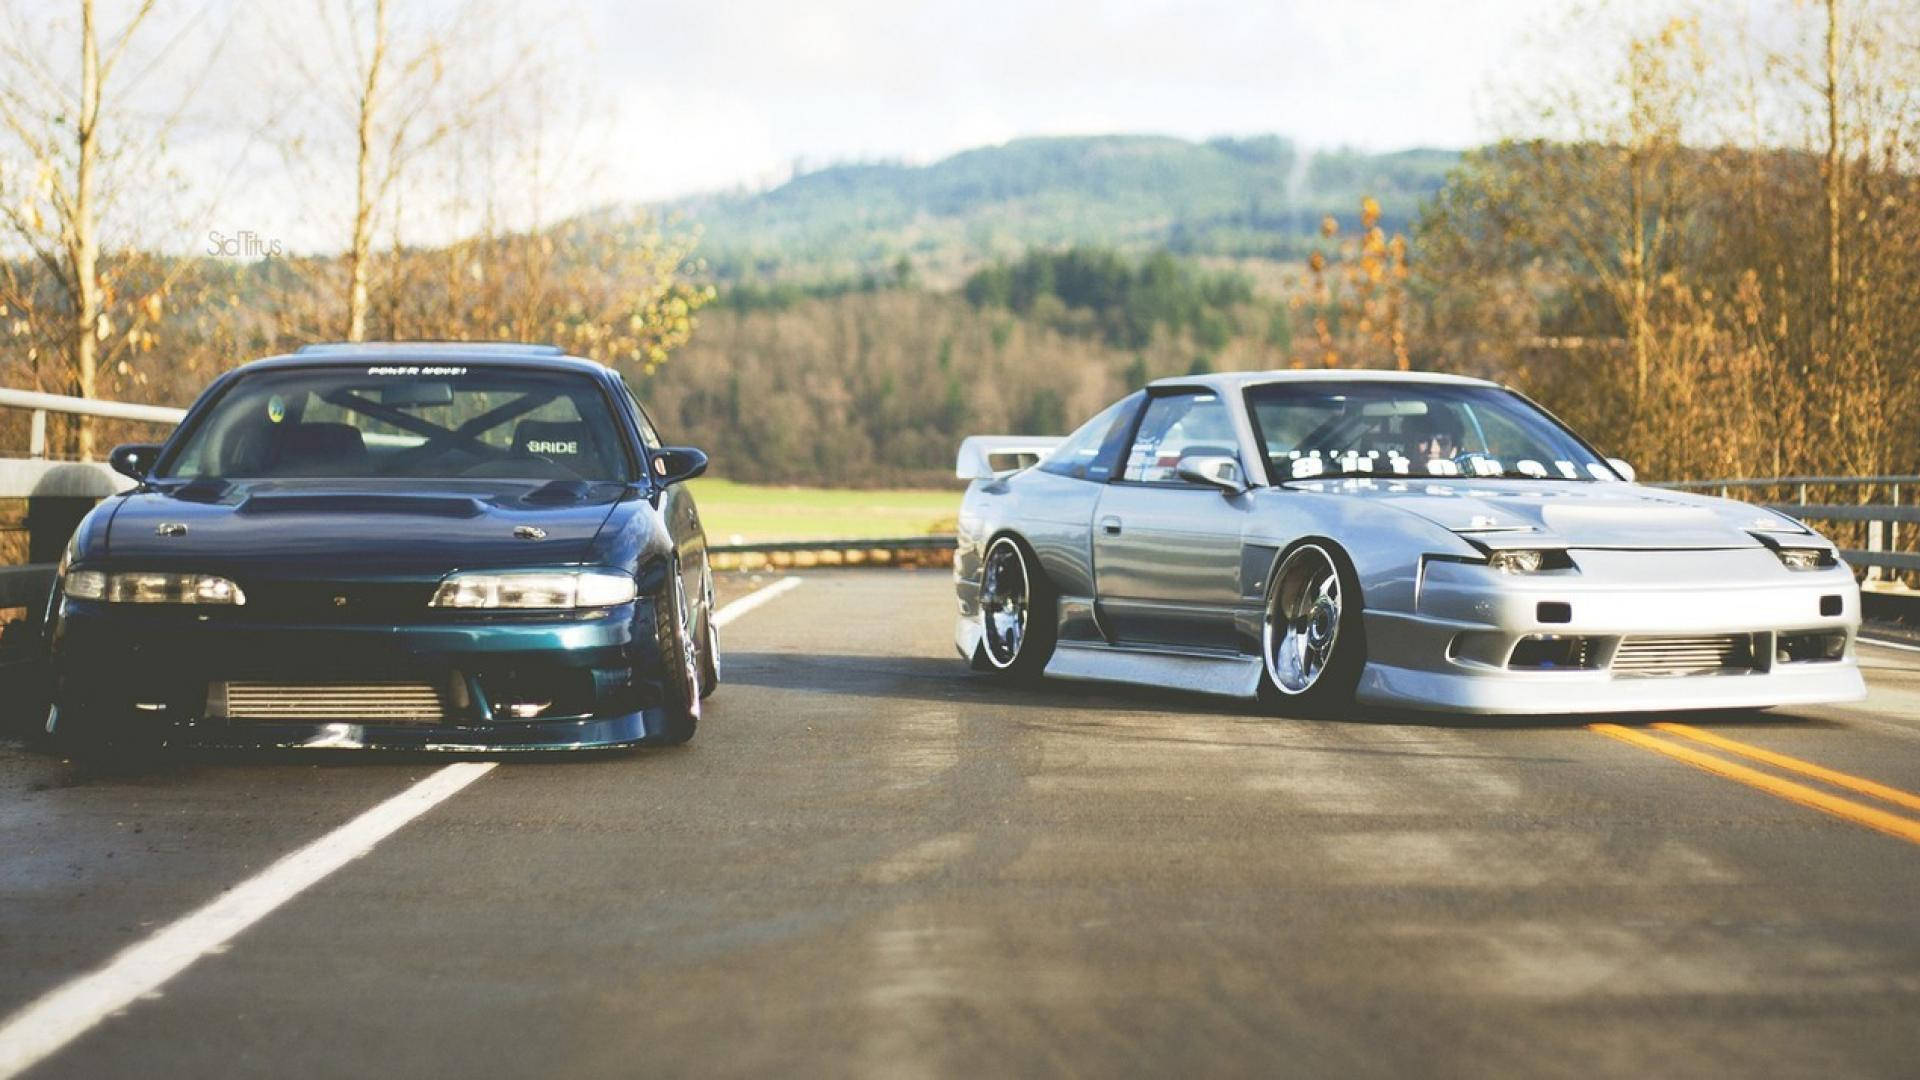 Jdm Cars Parked On Road Wallpaper